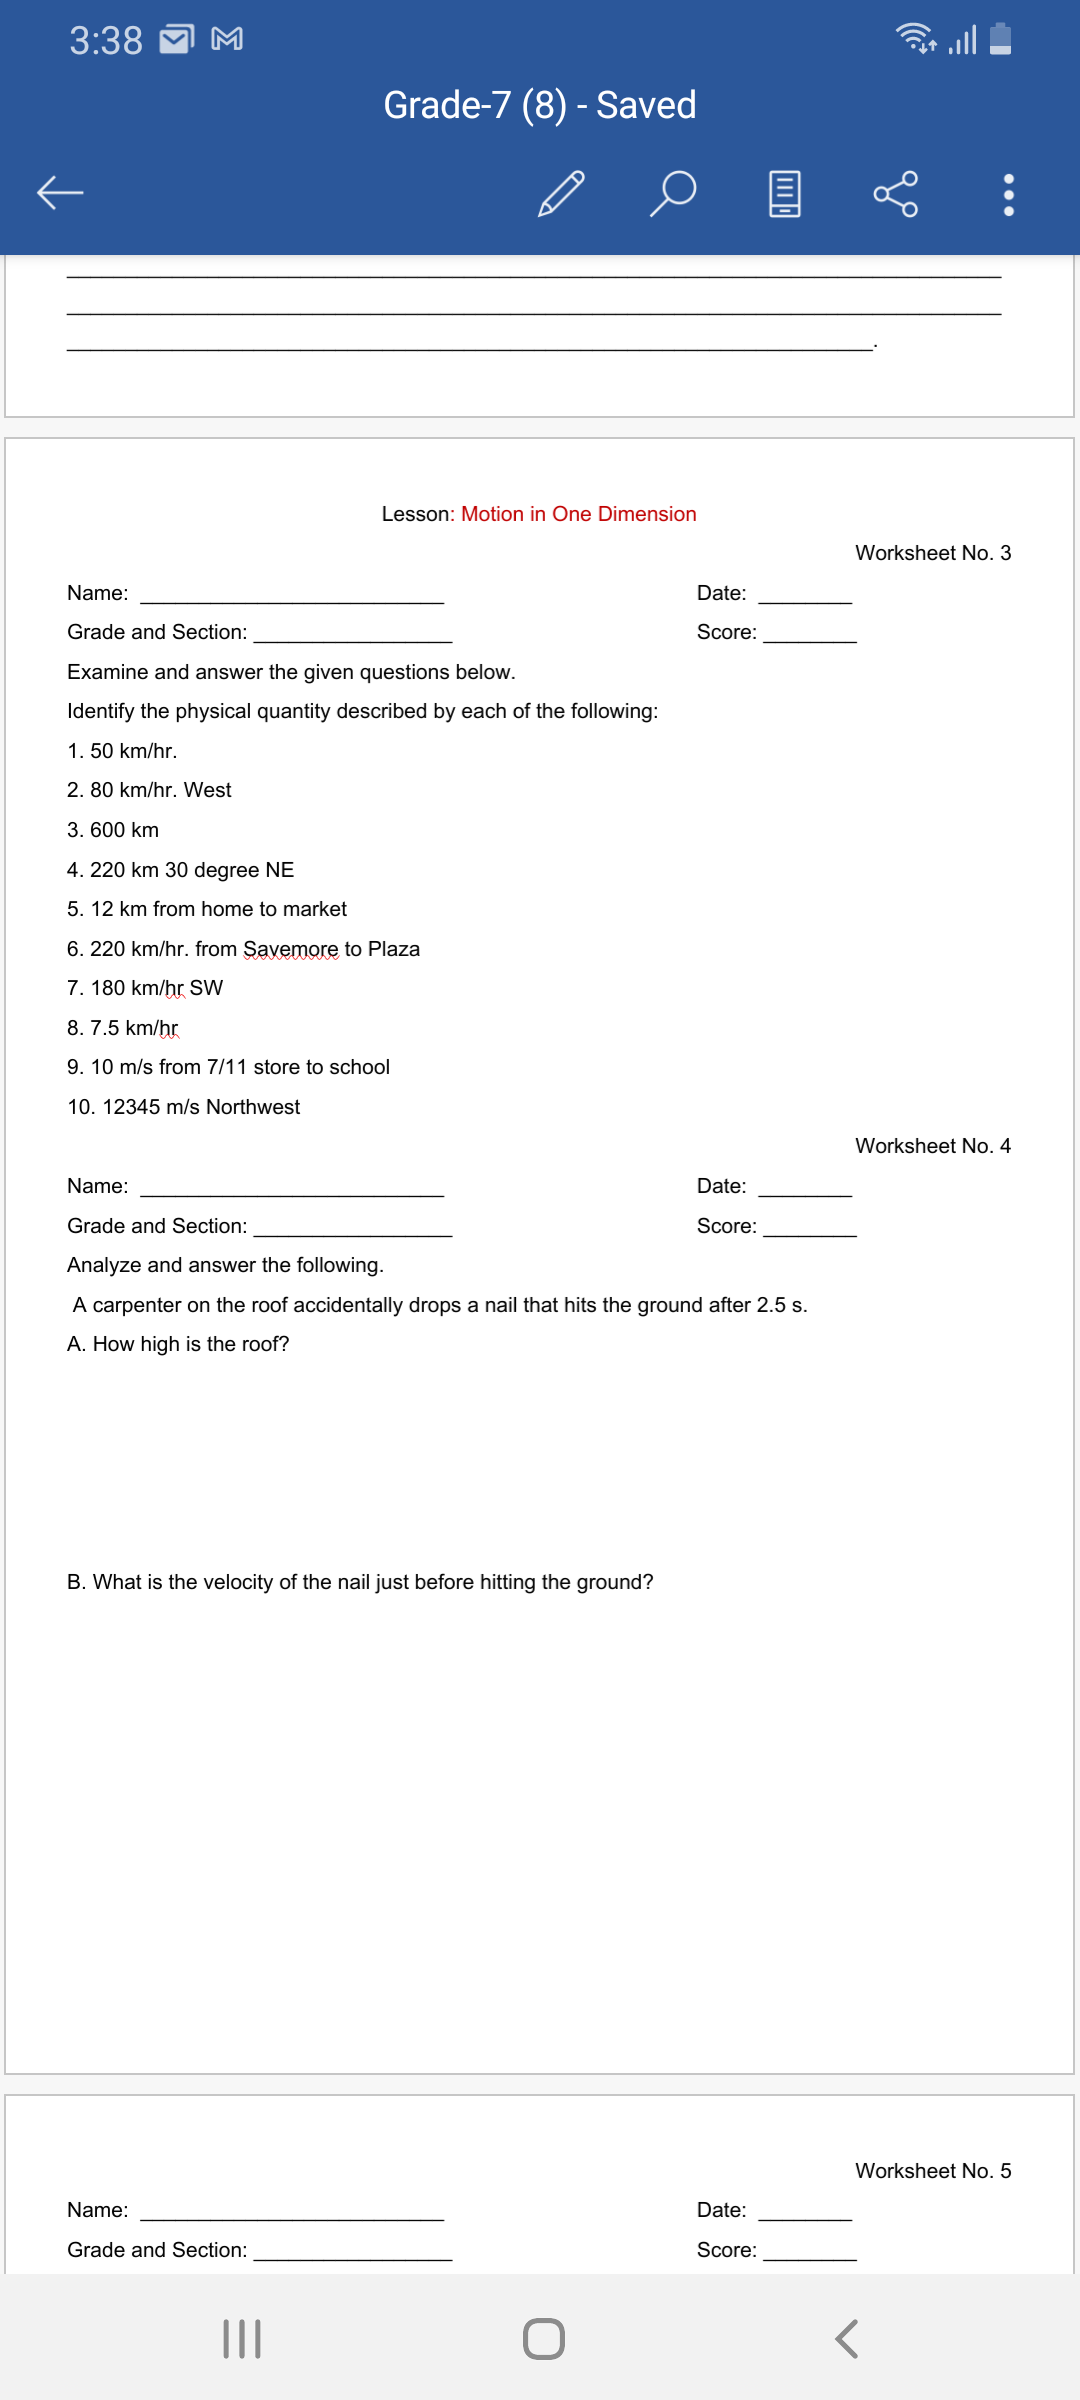 3:38
Grade-7 (8) - Saved
Lesson: Motion in One Dimension
Worksheet No. 3
Name:
Date:
Grade and Section:
Score:
Examine and answer the given questions below.
Identify the physical quantity described by each of the following:
1. 50 km/hr.
2. 80 km/hr. West
3. 600 km
4. 220 km 30 degree NE
5. 12 km from home to market
6. 220 km/hr. from Savemore to Plaza
7. 180 km/hr SW
8. 7.5 km/hr
9. 10 m/s from 7/11 store to school
10. 12345 m/s Northwest
Worksheet No. 4
Name:
Date:
Grade and Section:
Score:
Analyze and answer the following.
A carpenter on the roof accidentally drops a nail that hits the ground after 2.5 s.
A. How high is the roof?
B. What is the velocity of the nail just before hitting the ground?
Worksheet No. 5
Name:
Date:
Grade and Section:
Score:
